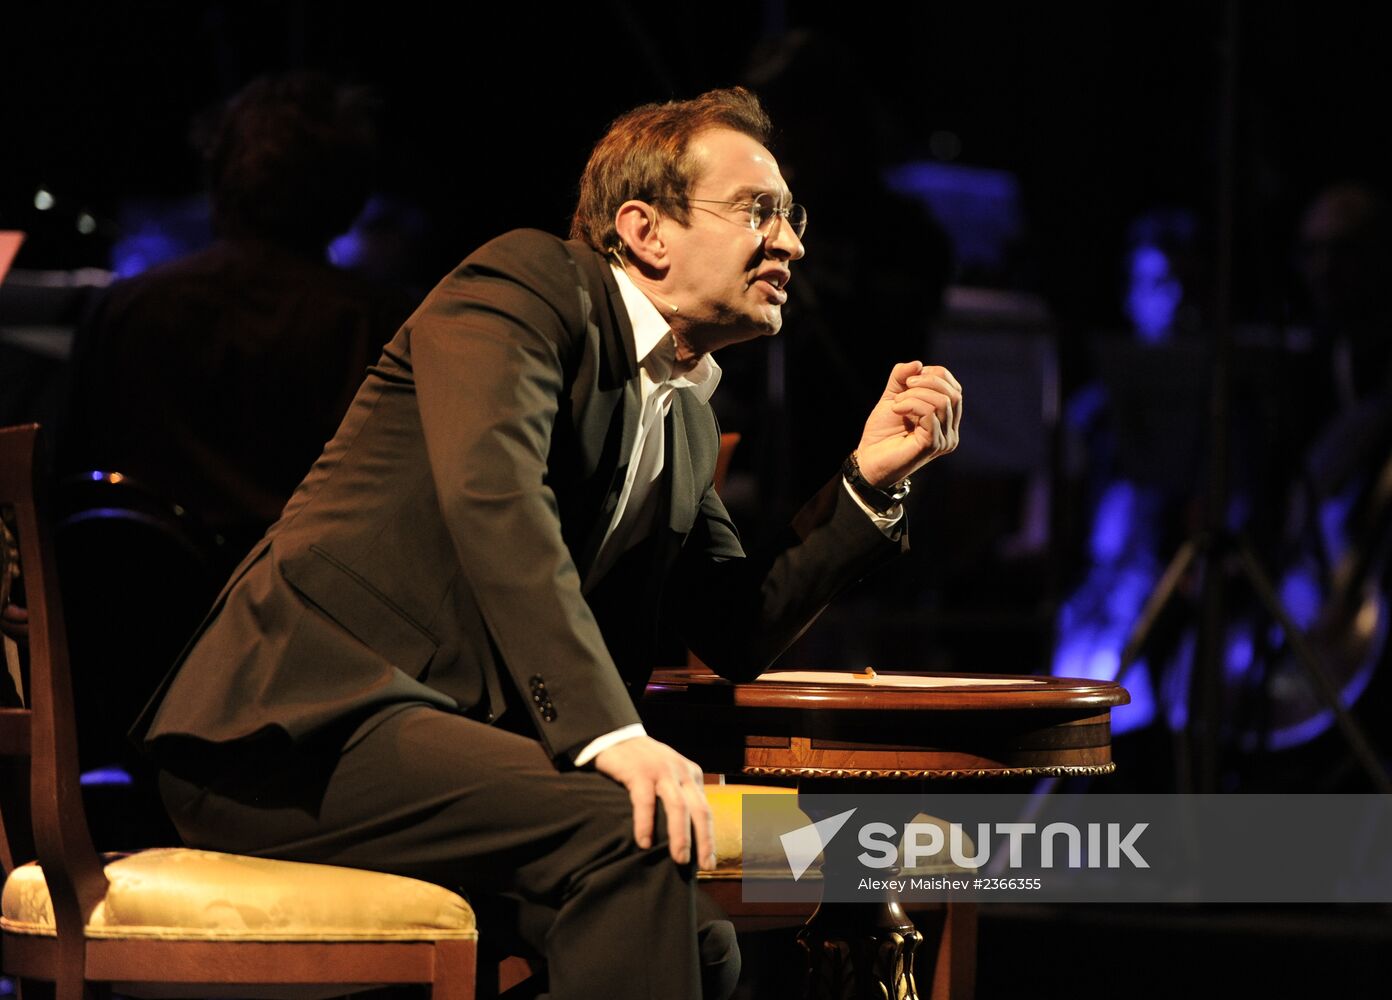 Literary and musical show "Eugene Onegin" at Winter Festival in Sochi